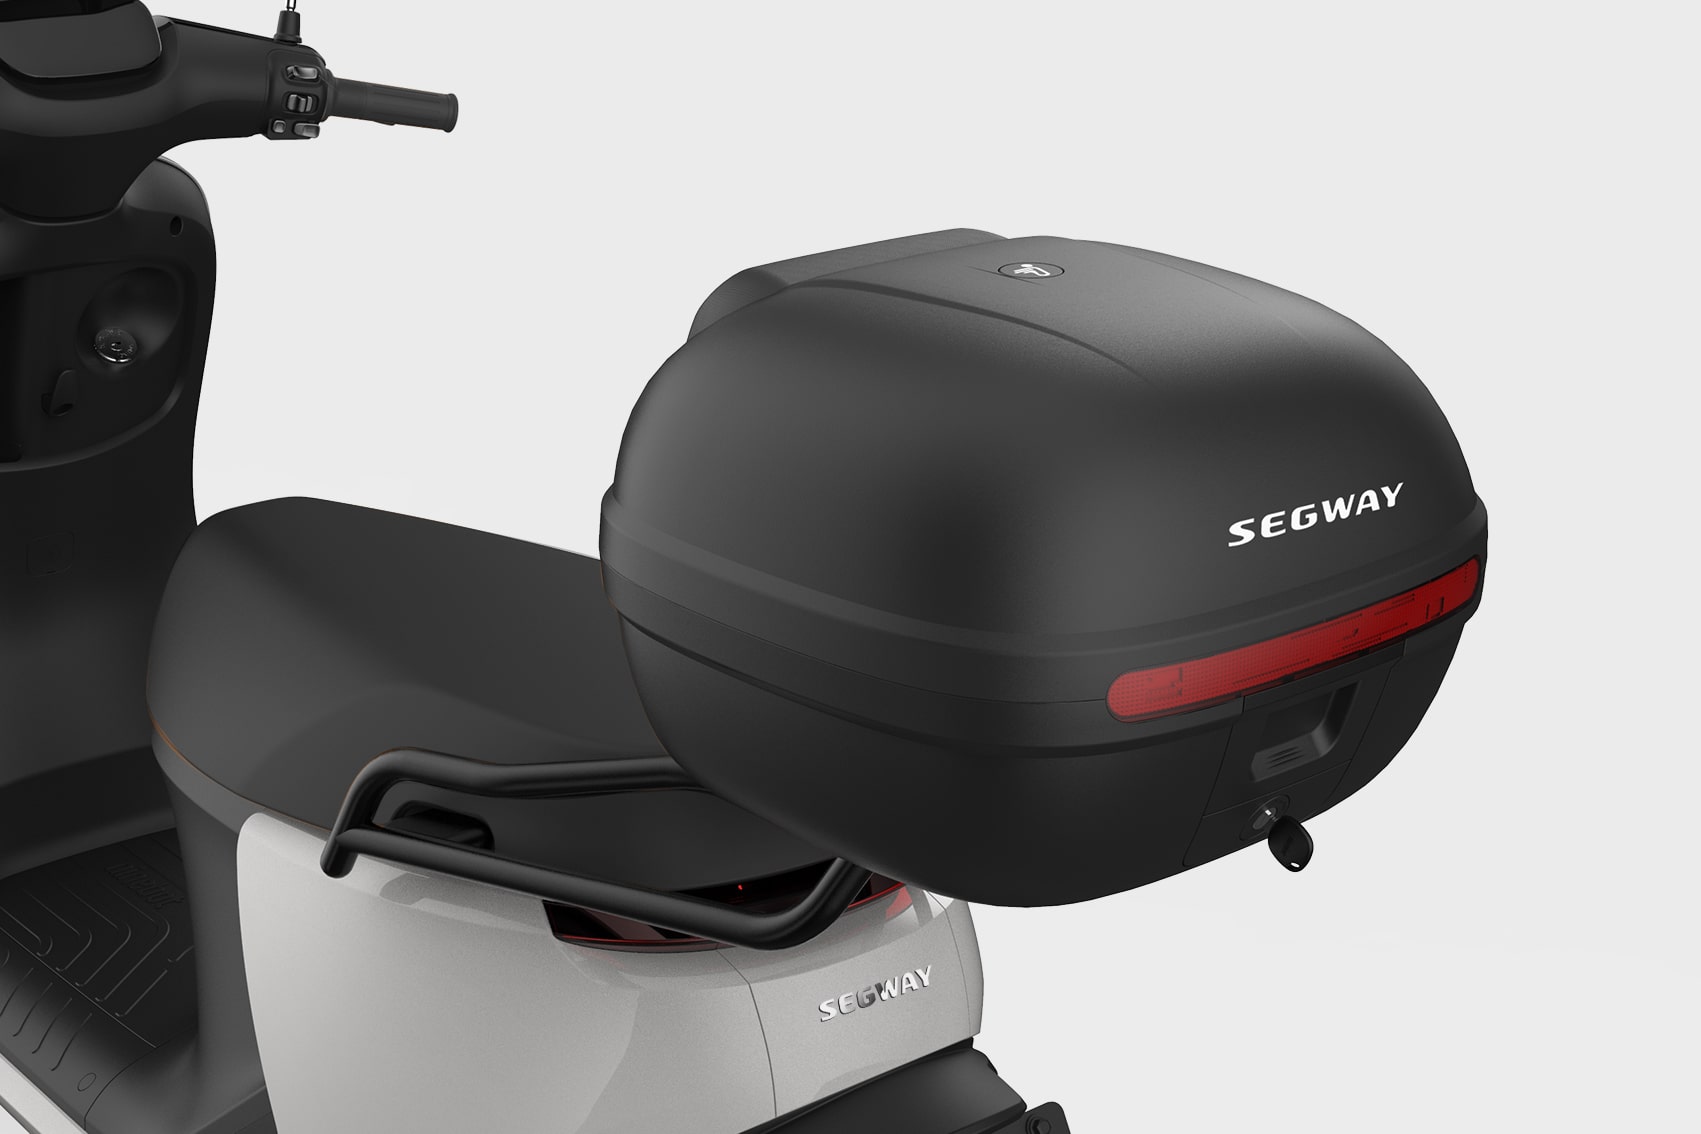 Segway scooter case